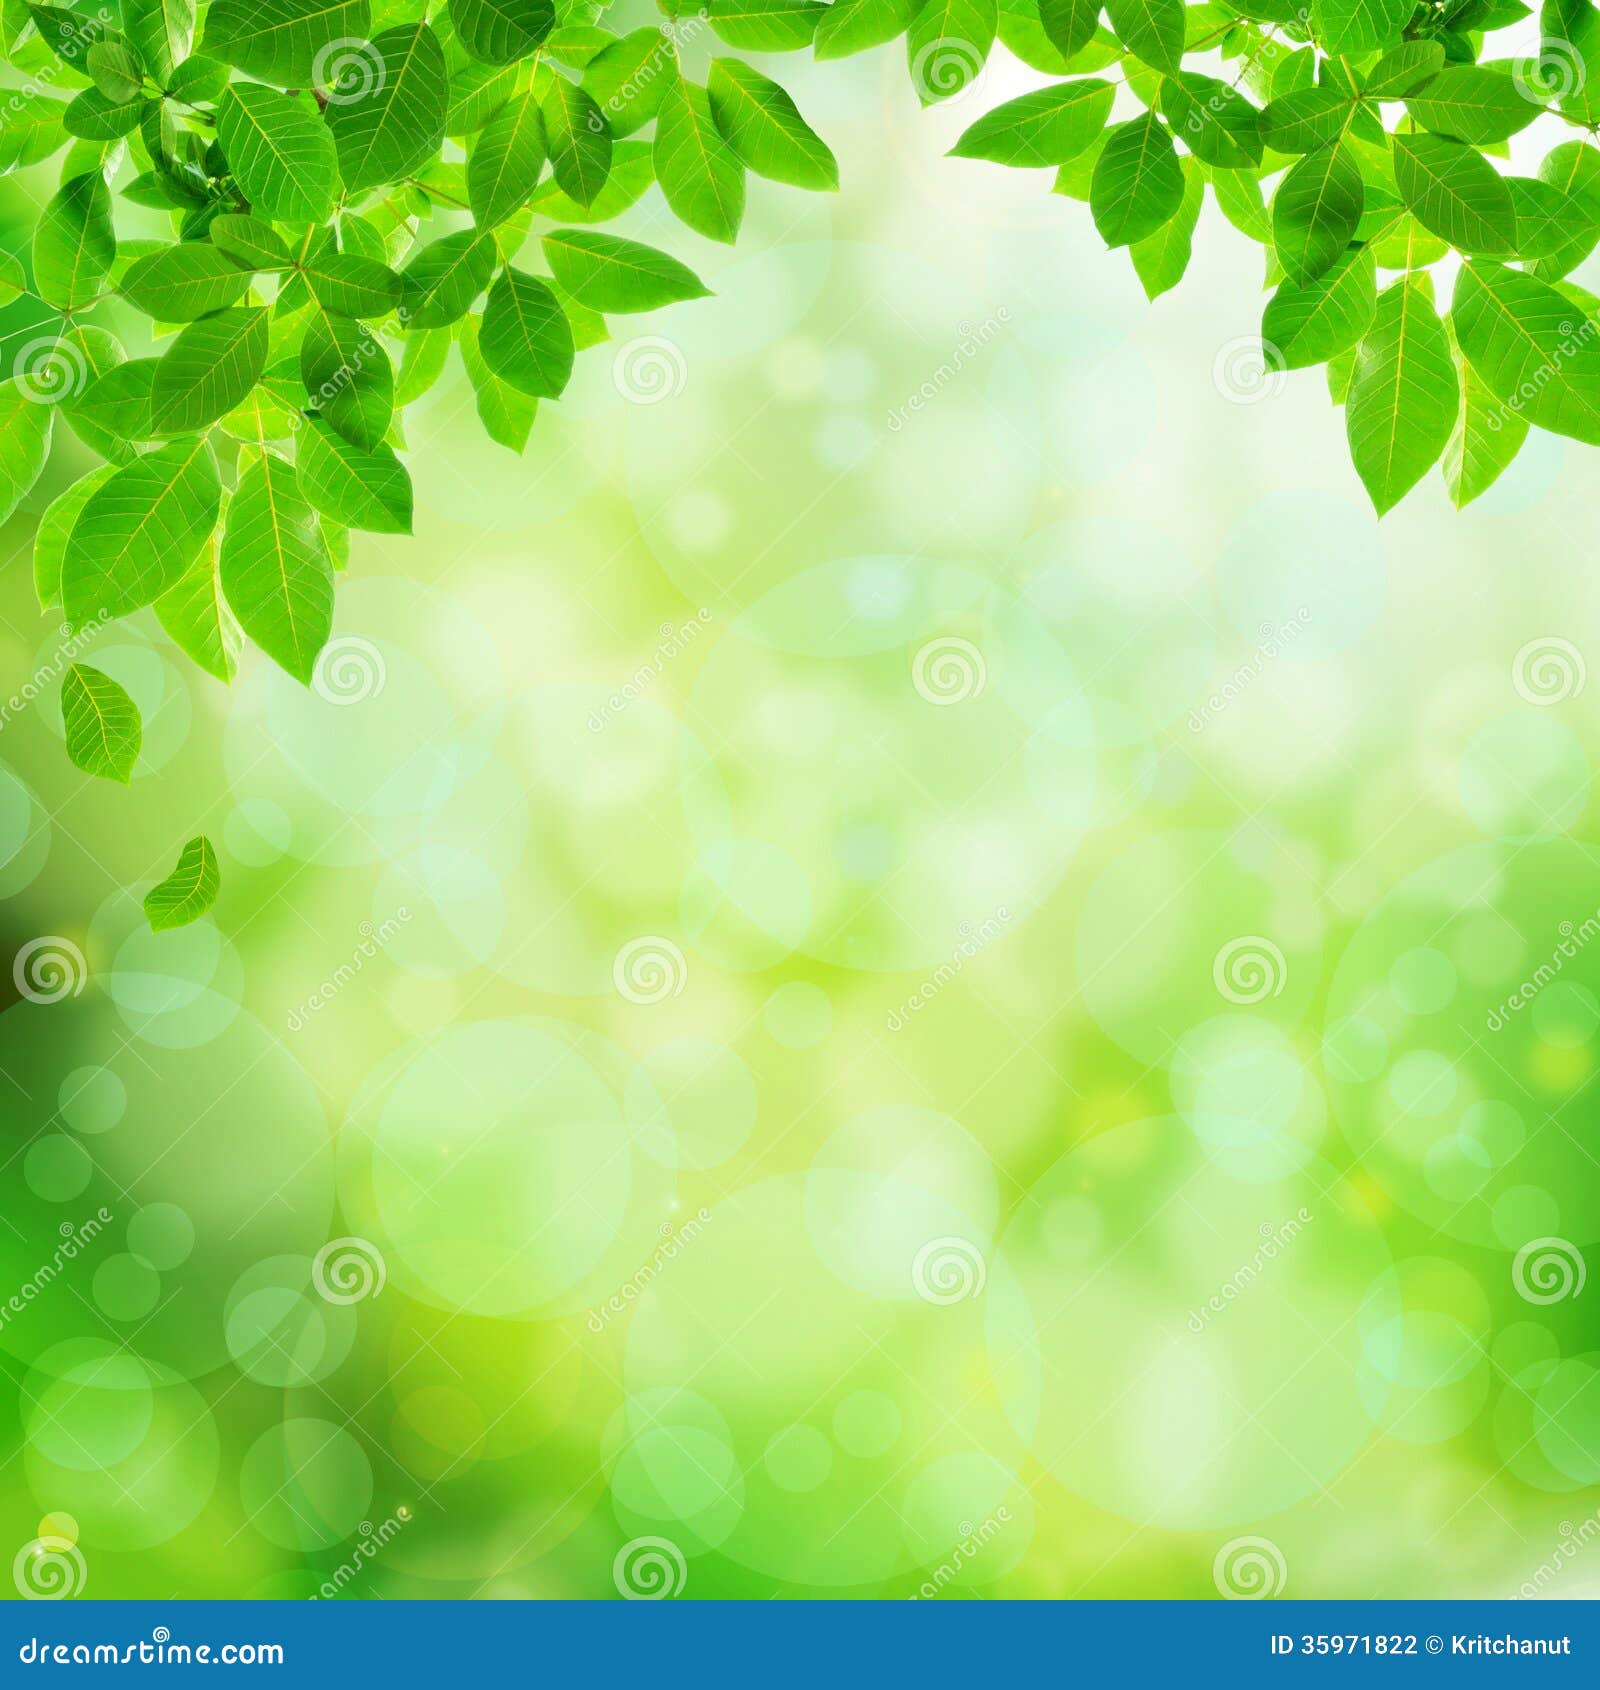 Green Natural Abstract Background Stock Photography ...